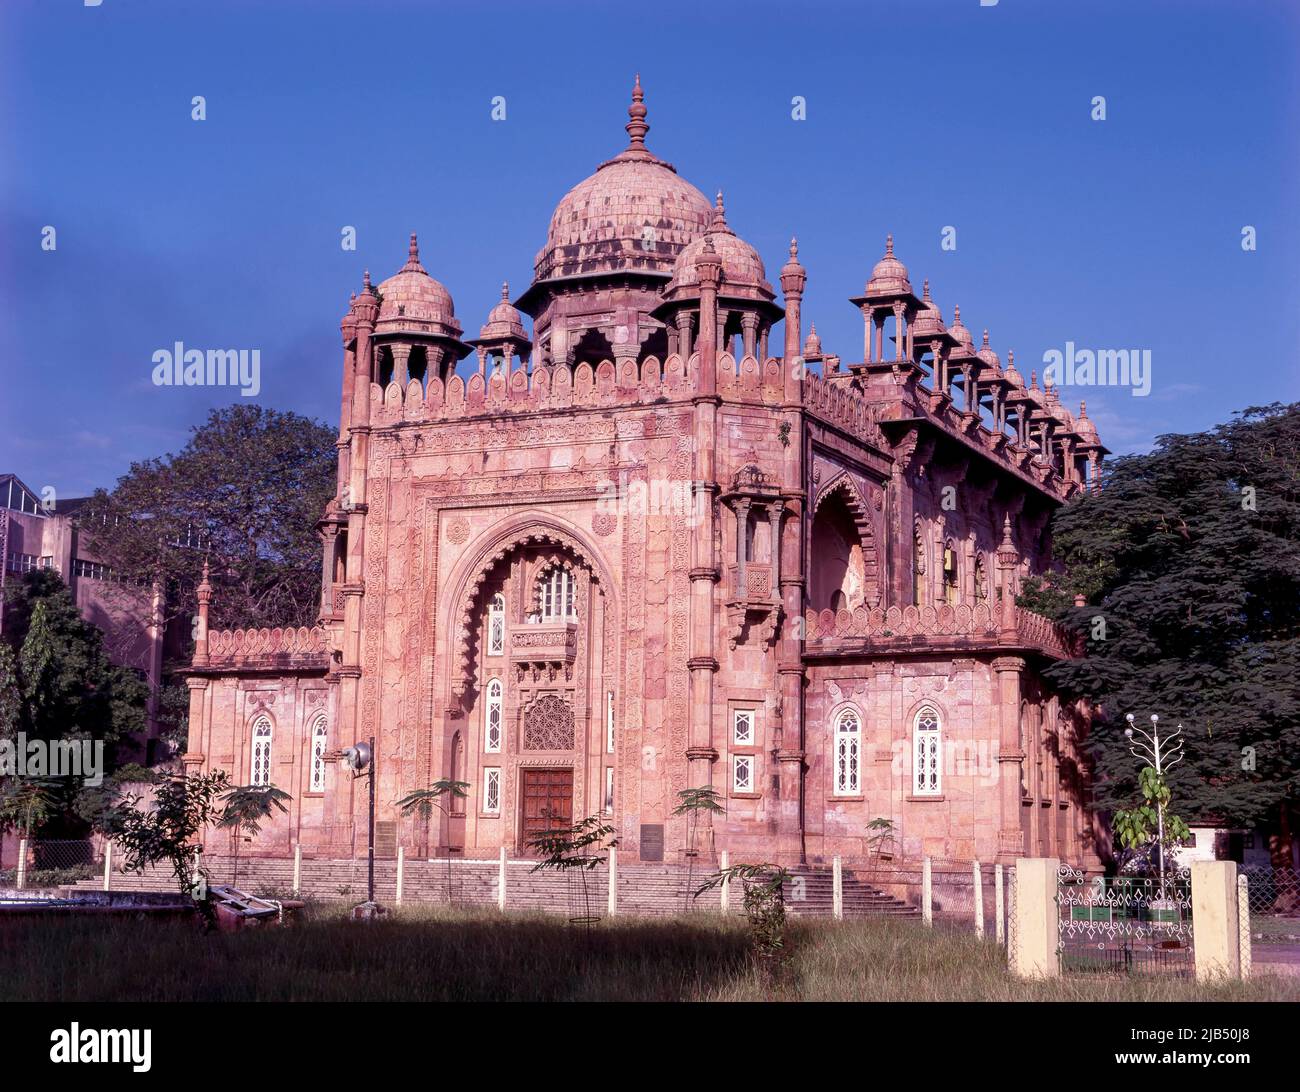 National Art Gallery built in 1906 in Chennai, Tamil Nadu, India, Asia Stock Photo